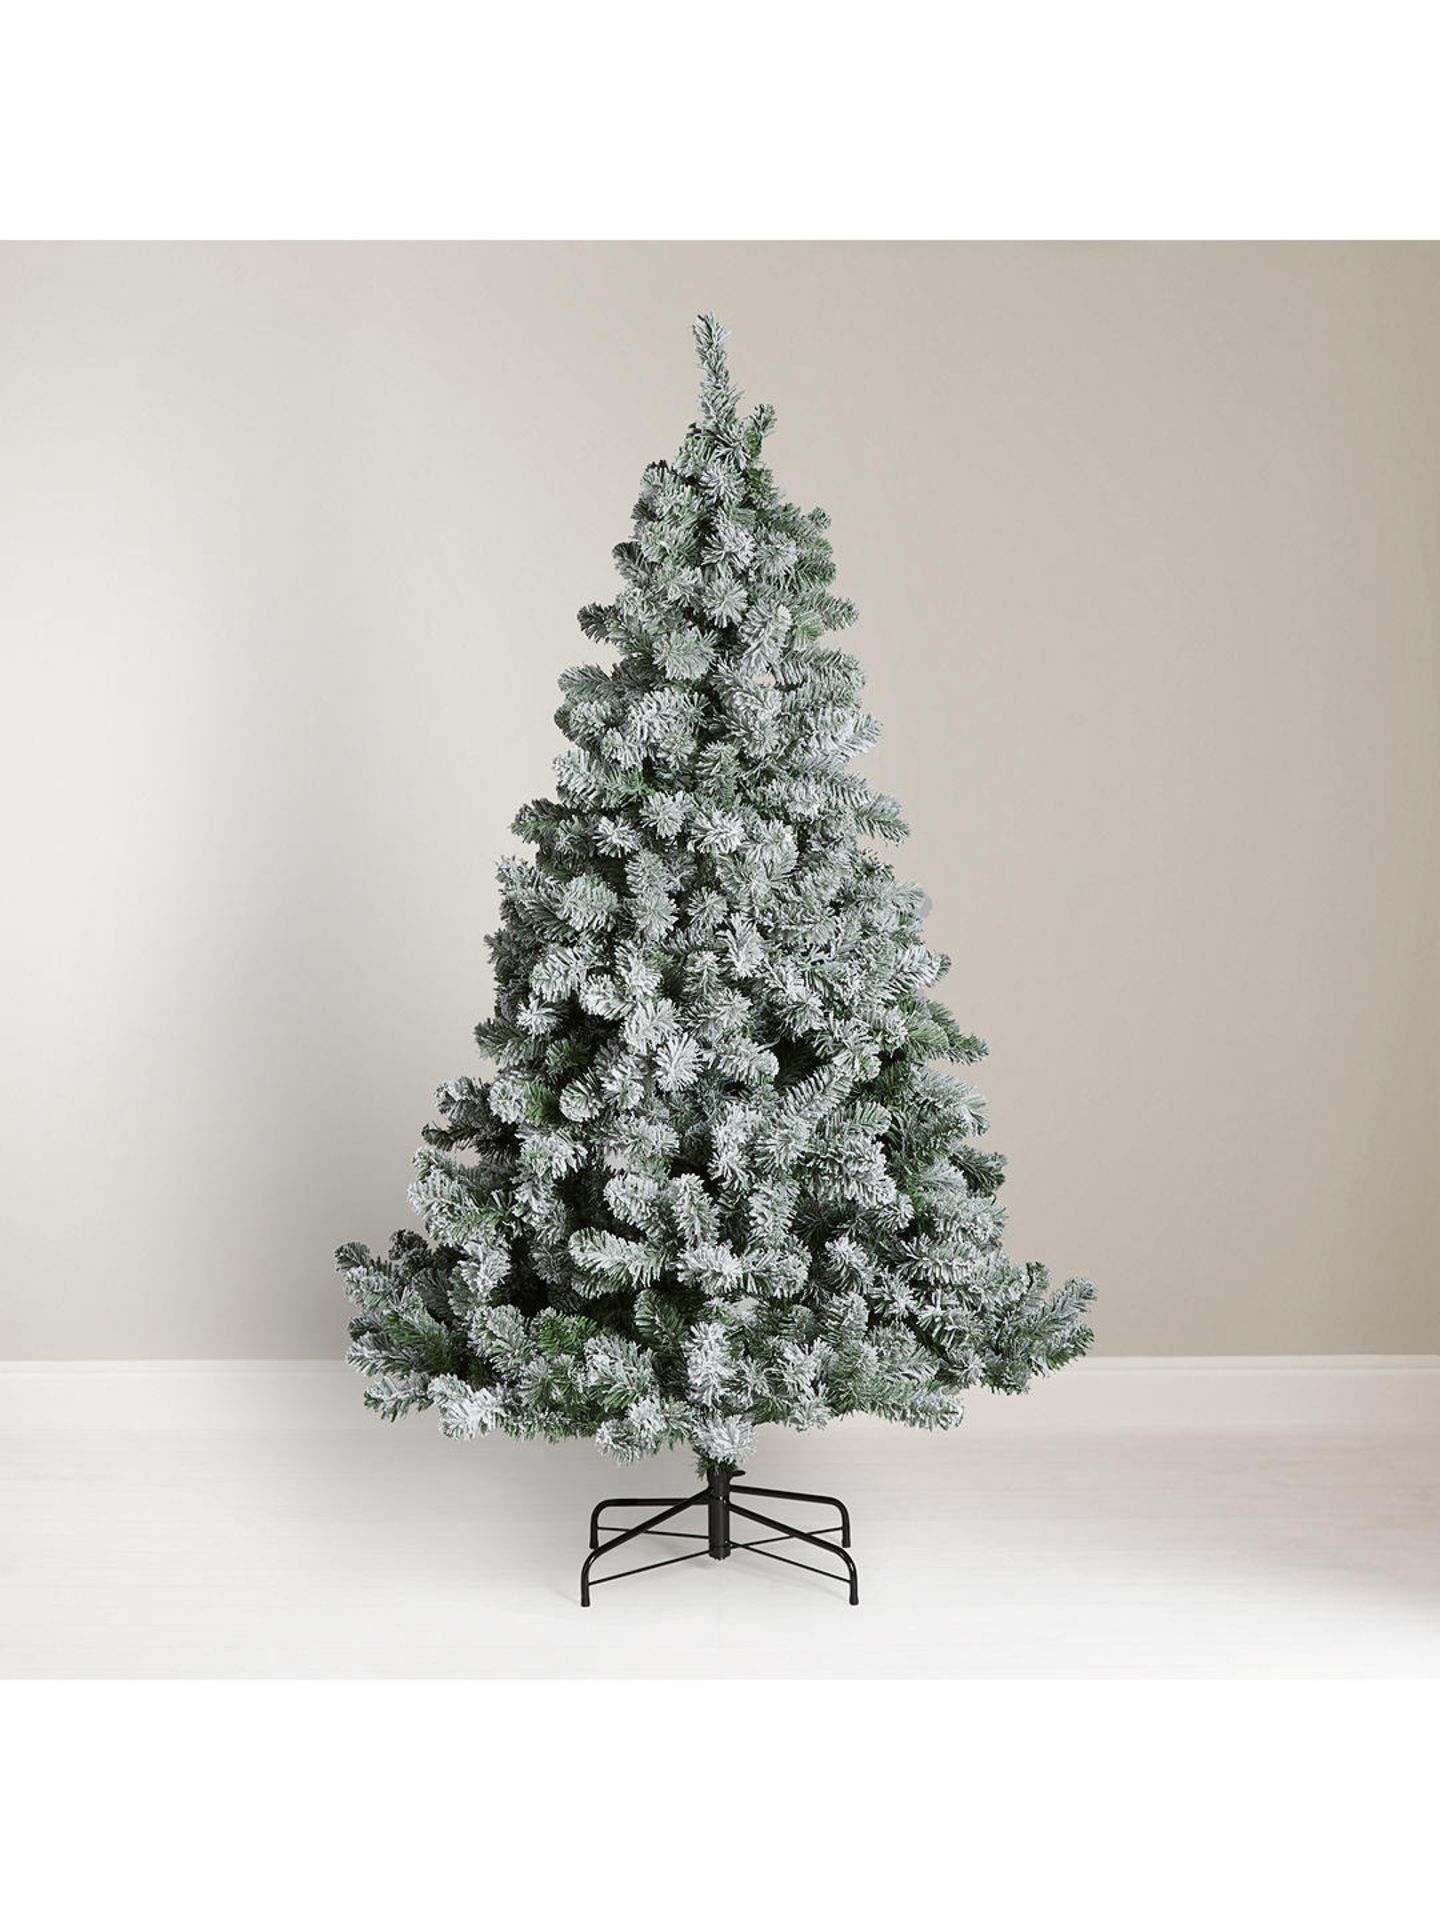 V Brand New Fantastic 6ft (1.8m) Snowy Christmas Tree - Classic Shape - Pull Down Branches -